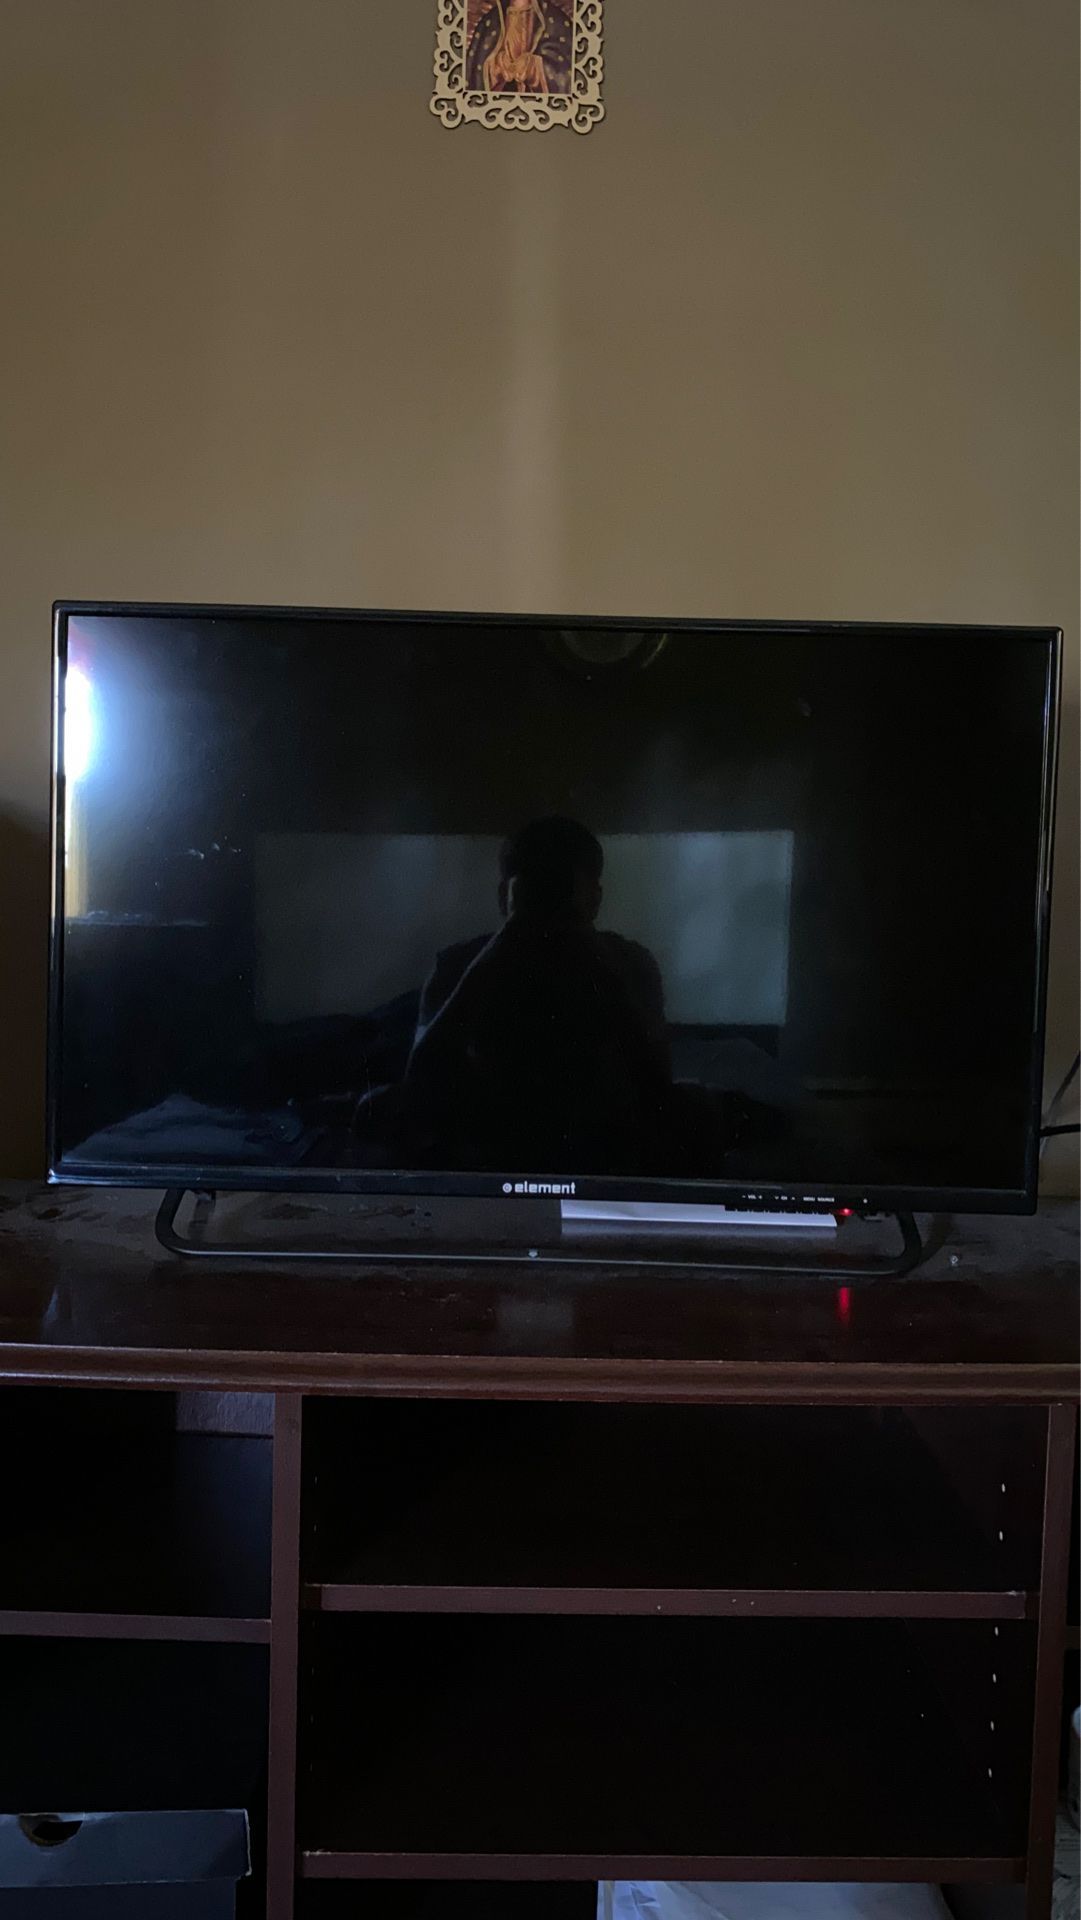 32 inch TV, works perfectly fine, comes with everything